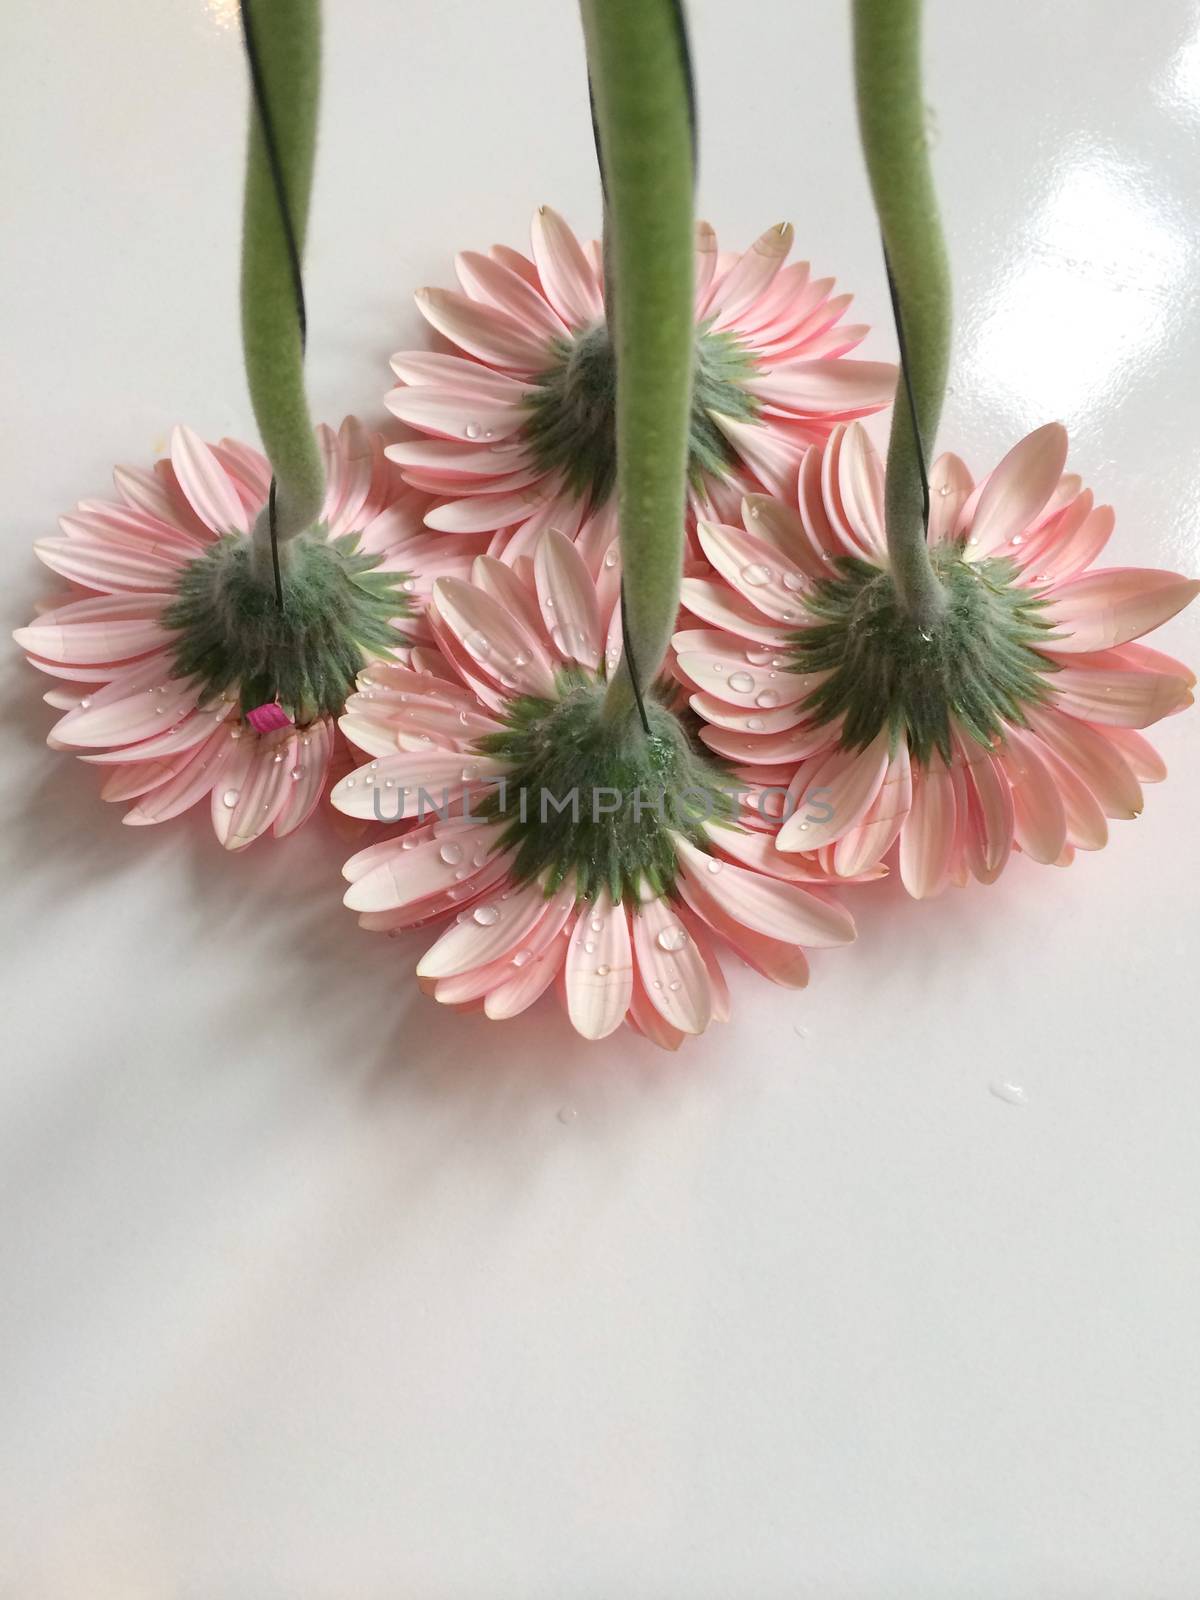 Upside down pink daisies with water drops